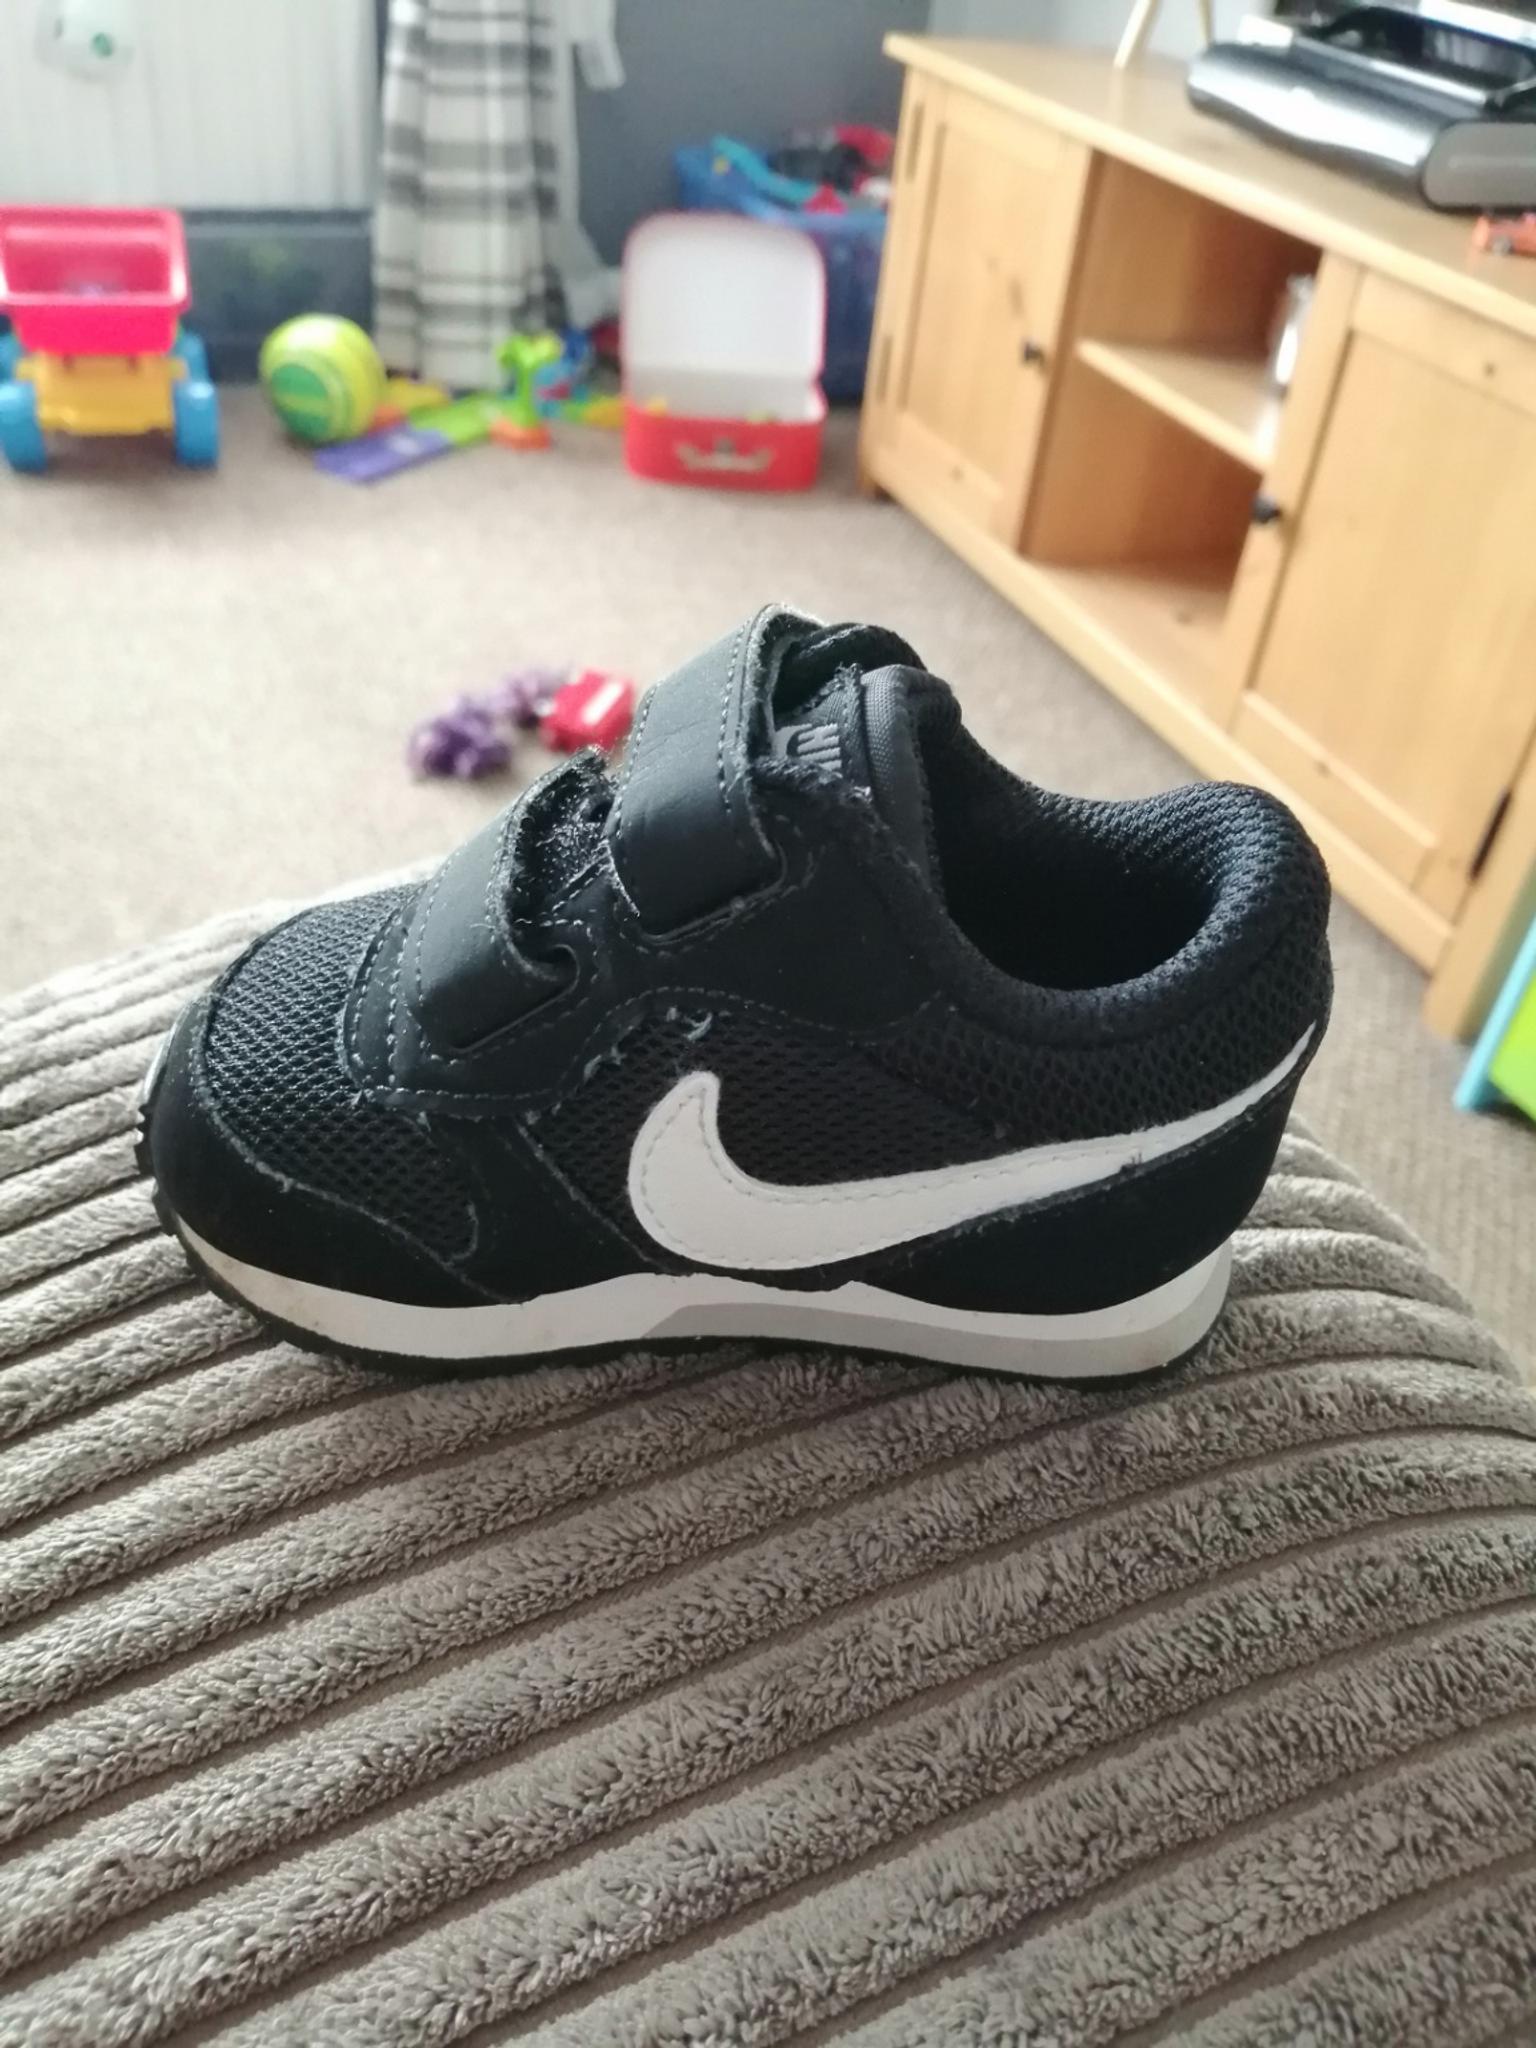 size 3.5 nike trainers